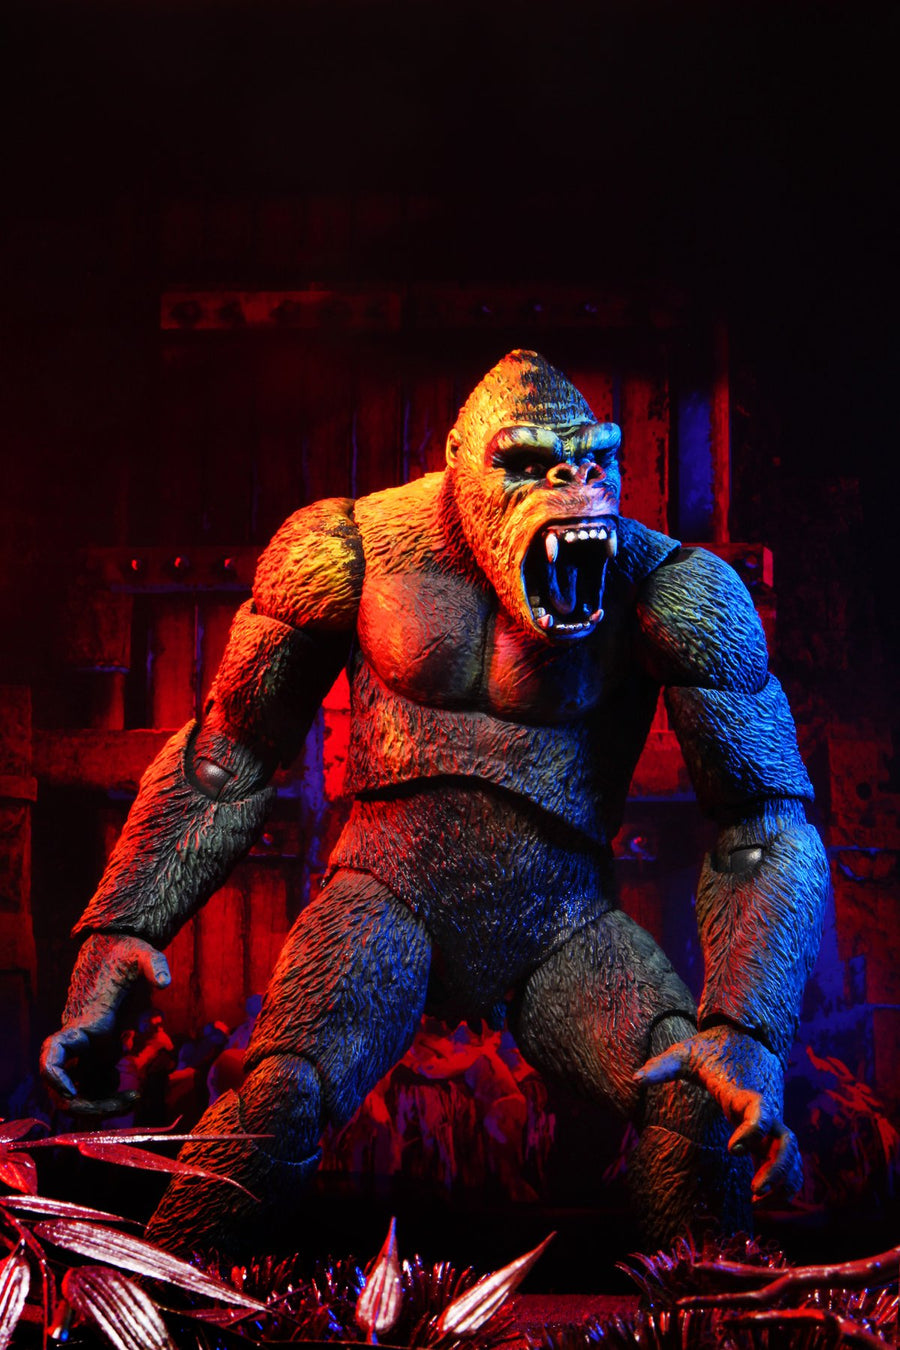 King Kong Ultimate (Illustrated Colour Variant) 7